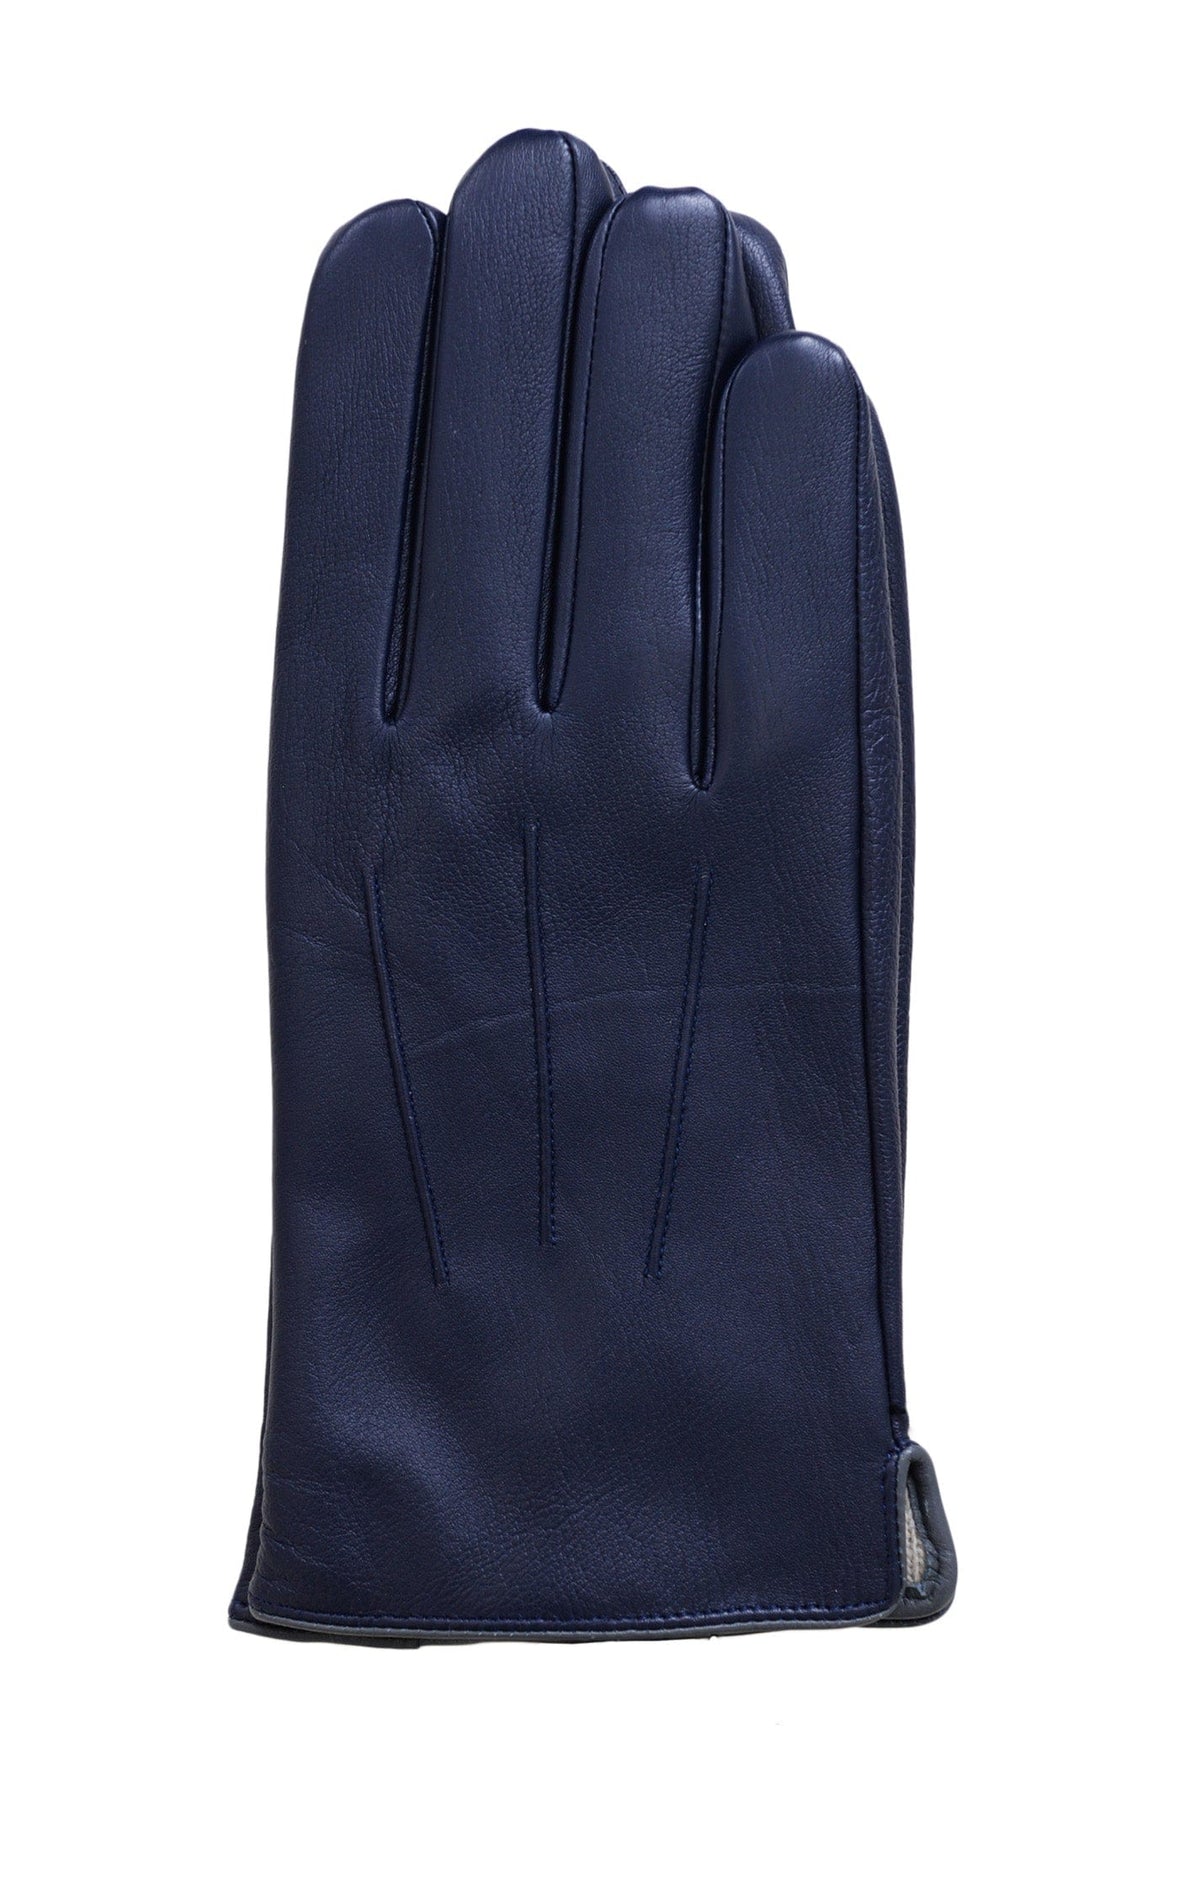 Ariston Ariston Mens Solid Navy Blue Touch Screen Leather Gloves